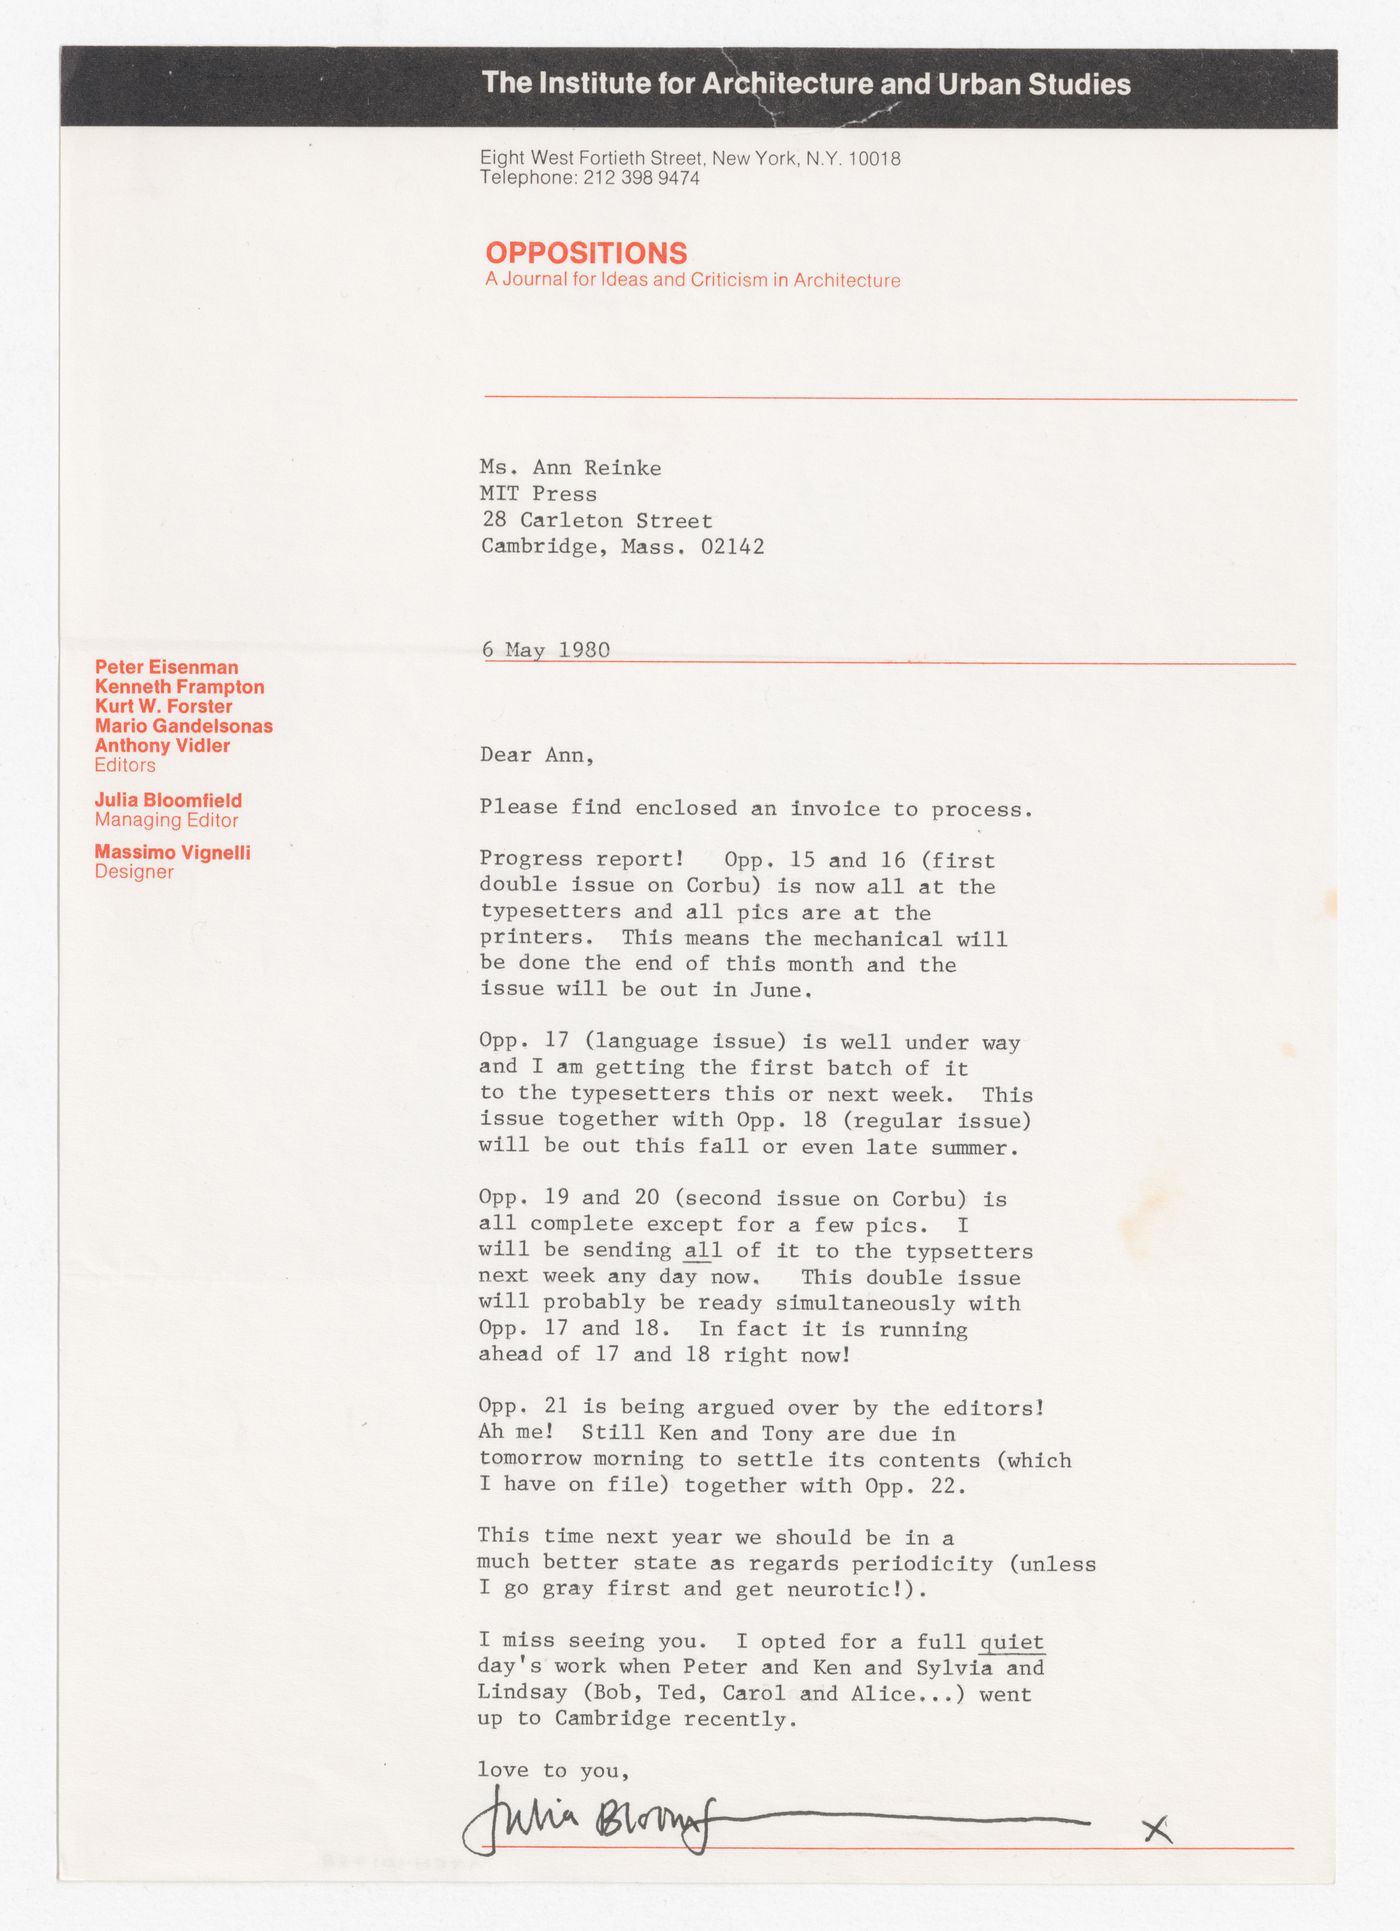 Letter from Julia Bloomfield to Ann Reinke about progress on Oppositions Journal issues 15, 16, 17, 18, 19, 20, 21, and 22